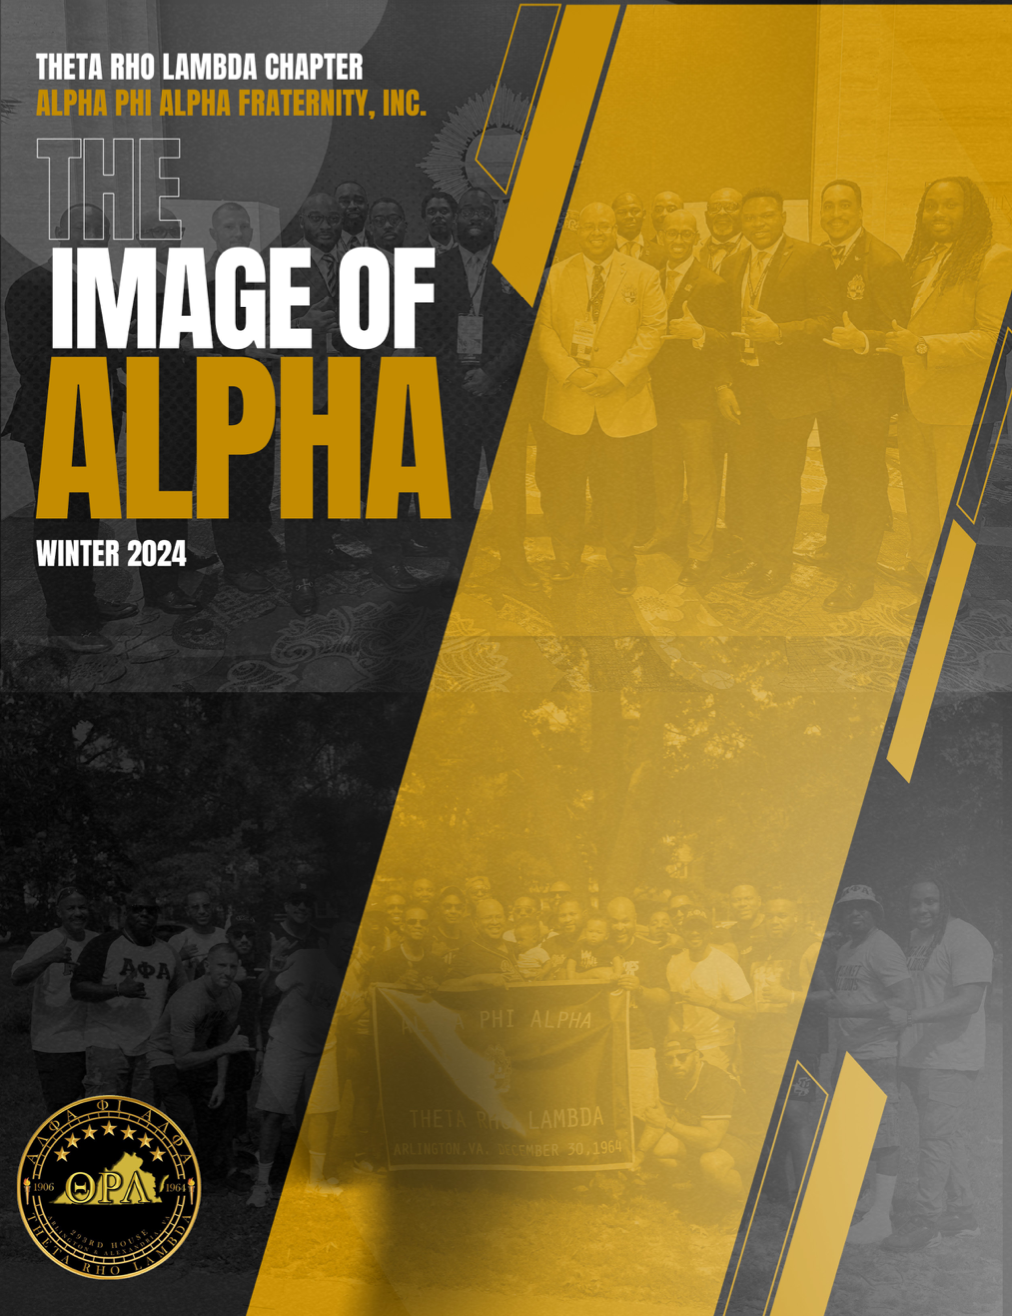 The Image of Alpha (Winter 2024)